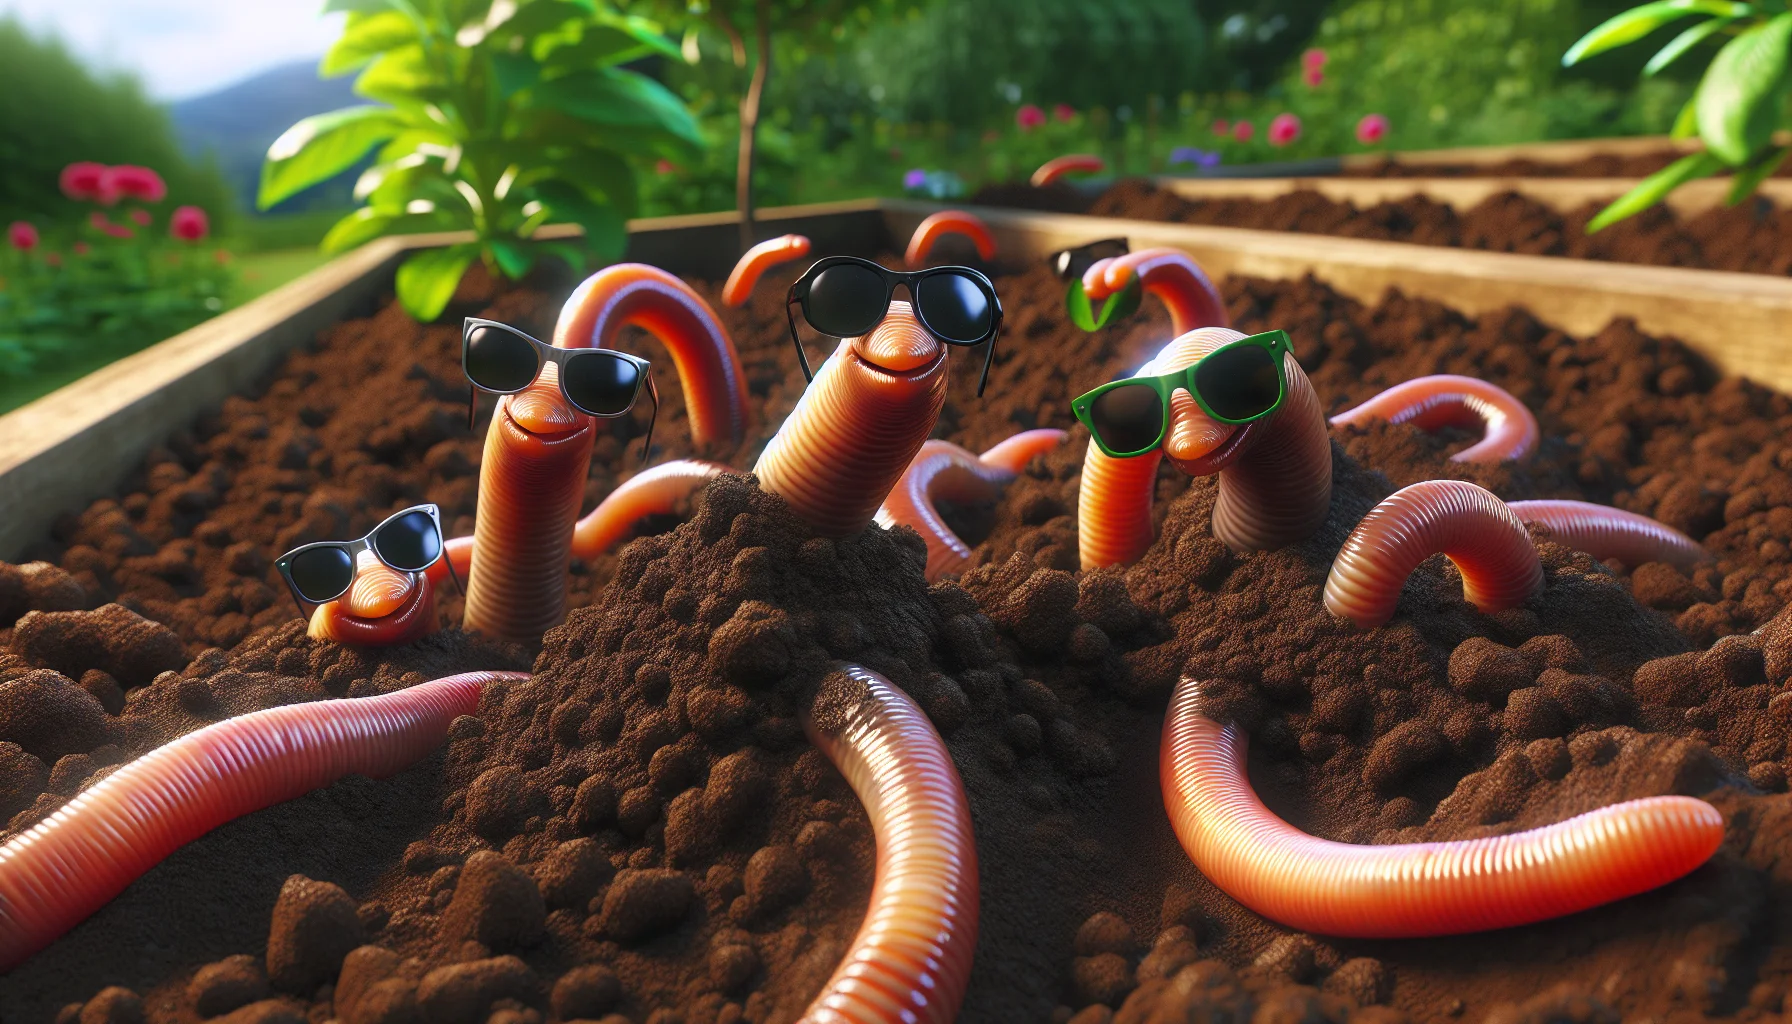 Generate a photorealistic image depicting an amusing scenario in a garden. The scene features several mischievous worms playfully making their way through the rich, nutritious garden soil. These worms, being cheekily represented as 'bad', don a pair of sunglasses, showcasing their playful nature. Their adventures in the garden are intended to spark a sense of joy and intrigue, encouraging viewers to partake in the therapeutic activity of gardening.